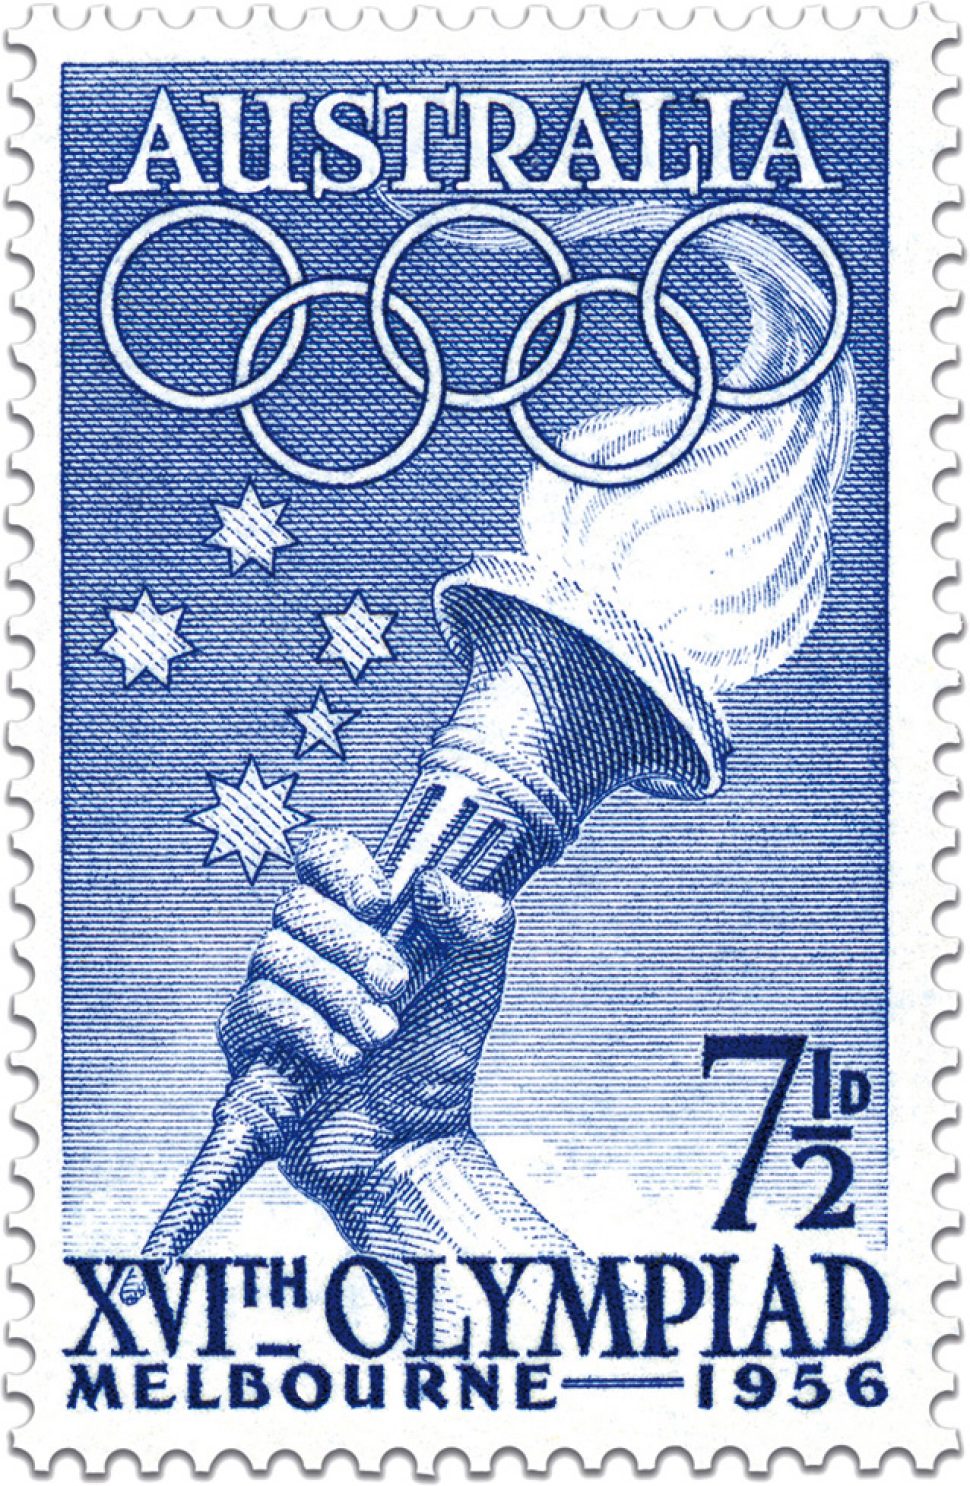 1956 Melbourne Olympics stamp